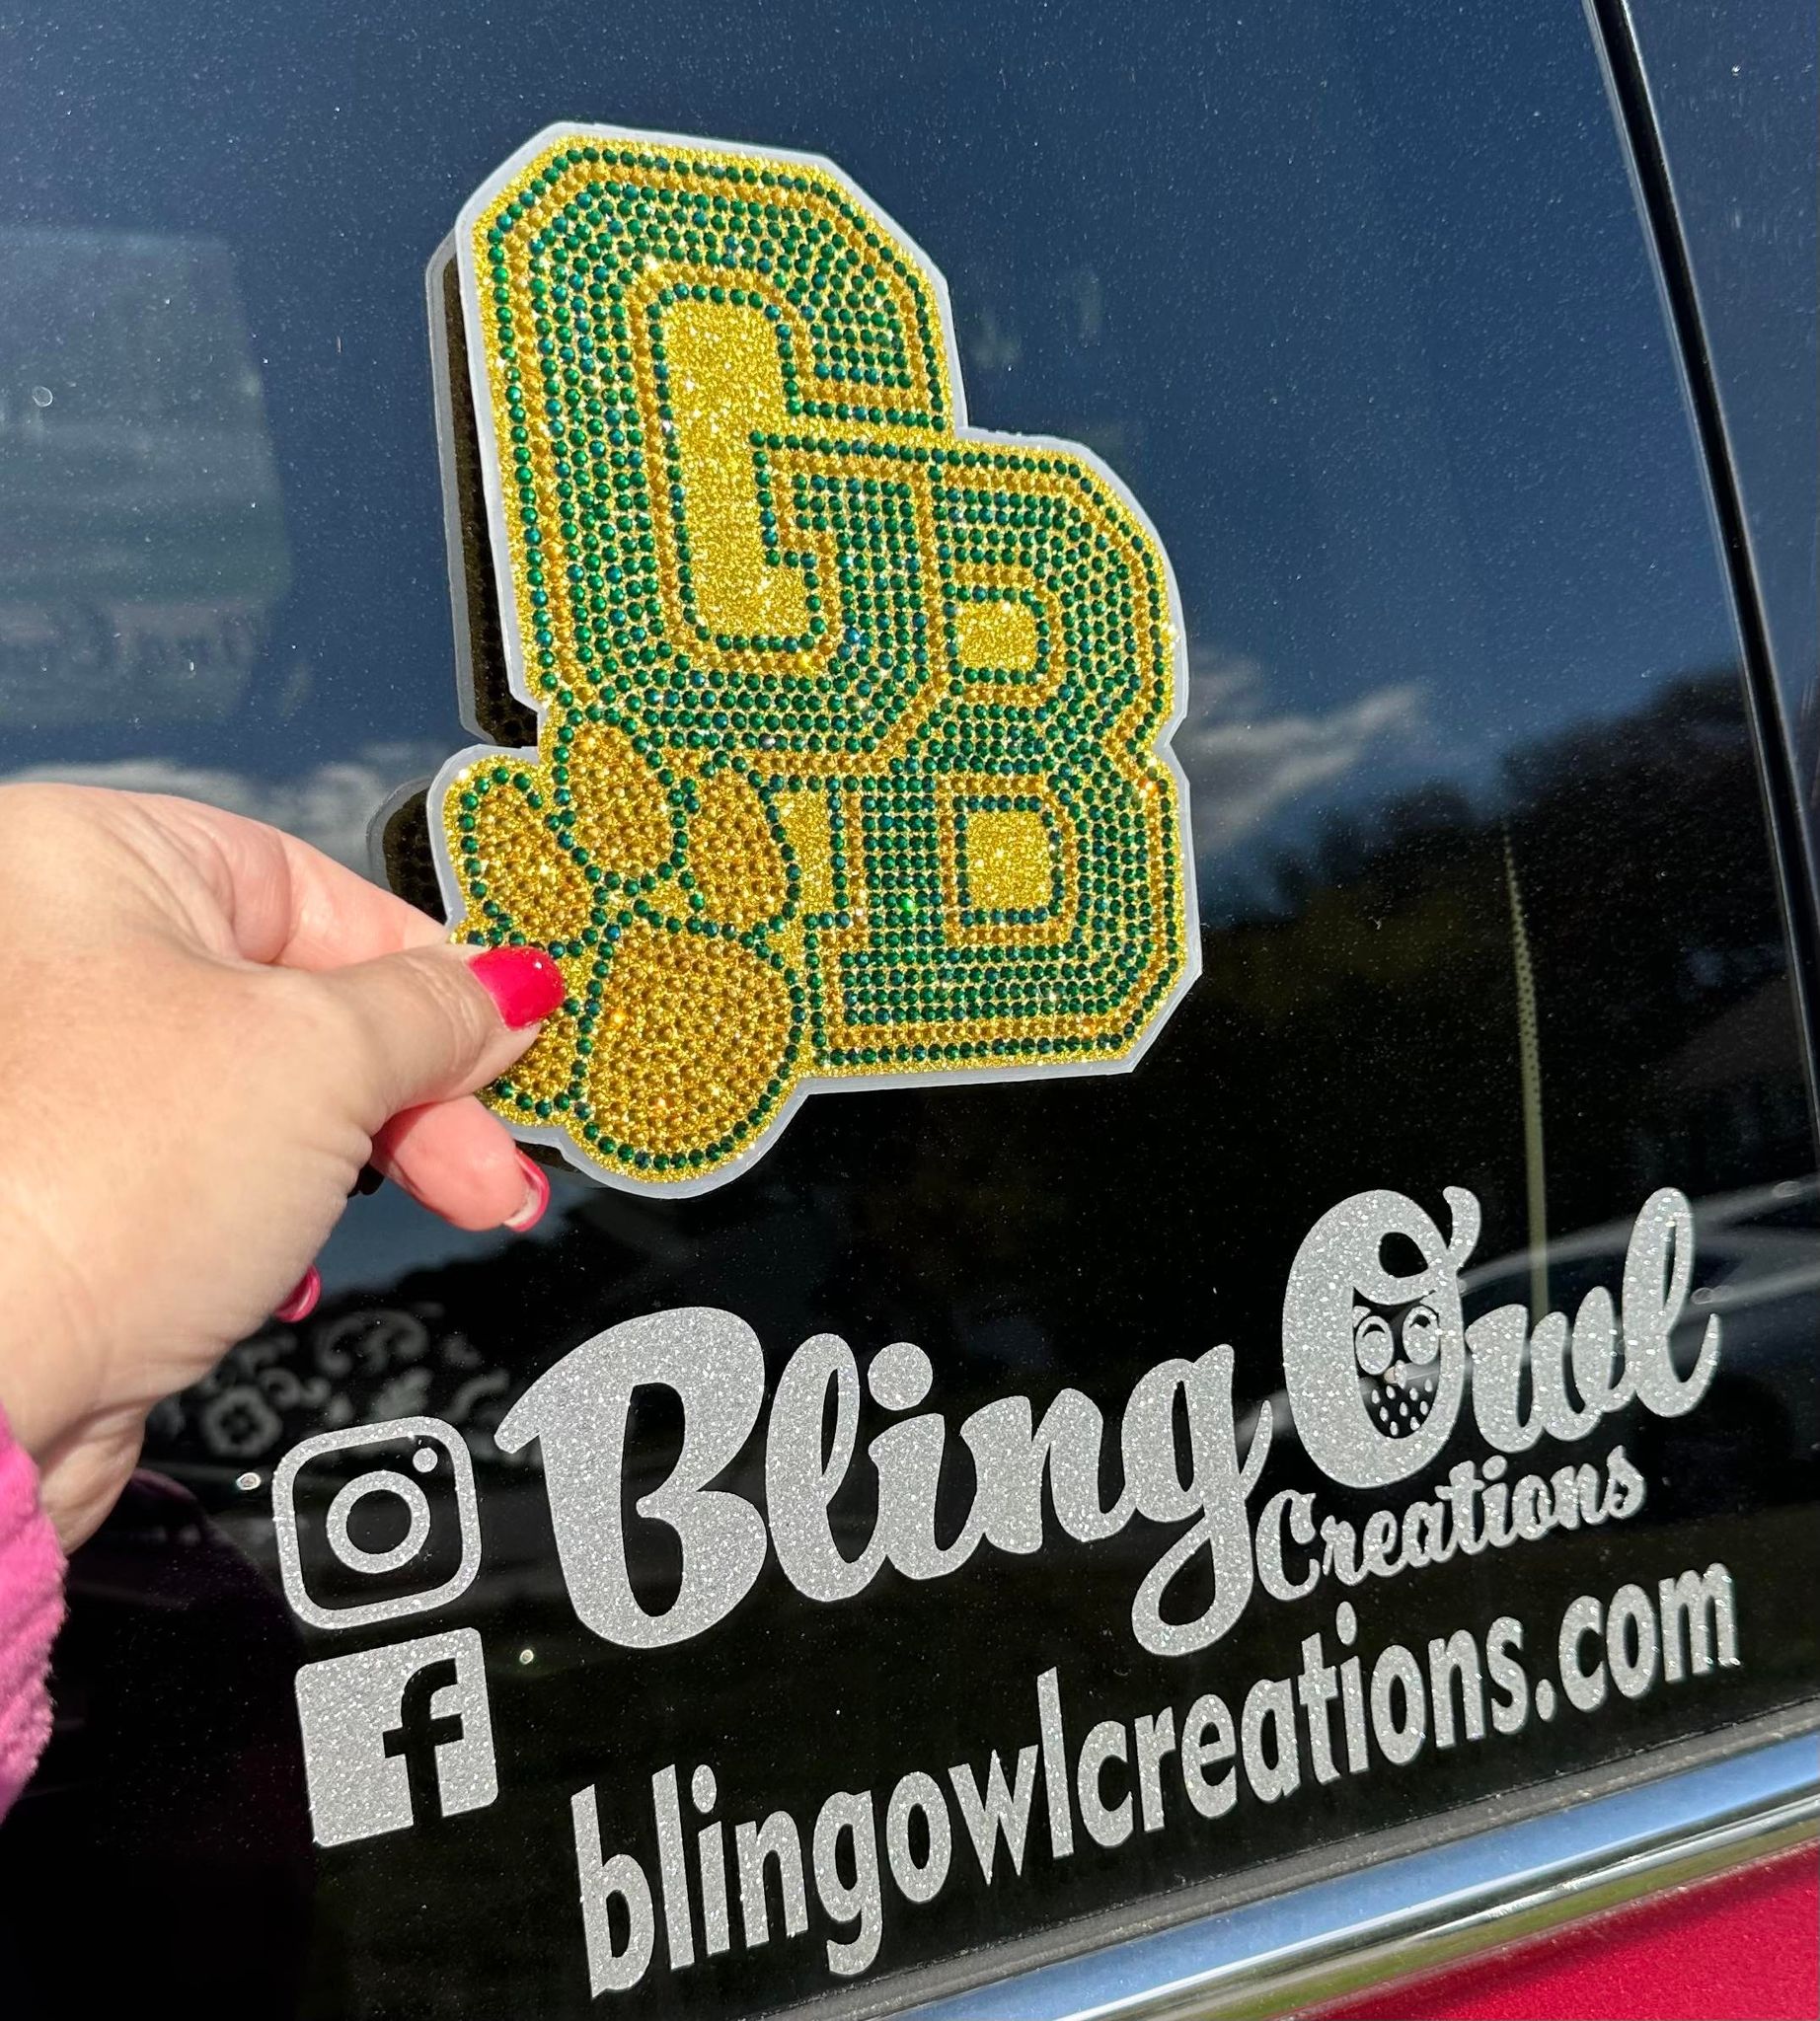 Custom Rhinestone Decal GB Paw decal add_sparkle bling_your car sparkle anywhere _ perfect gift ideas Team decals